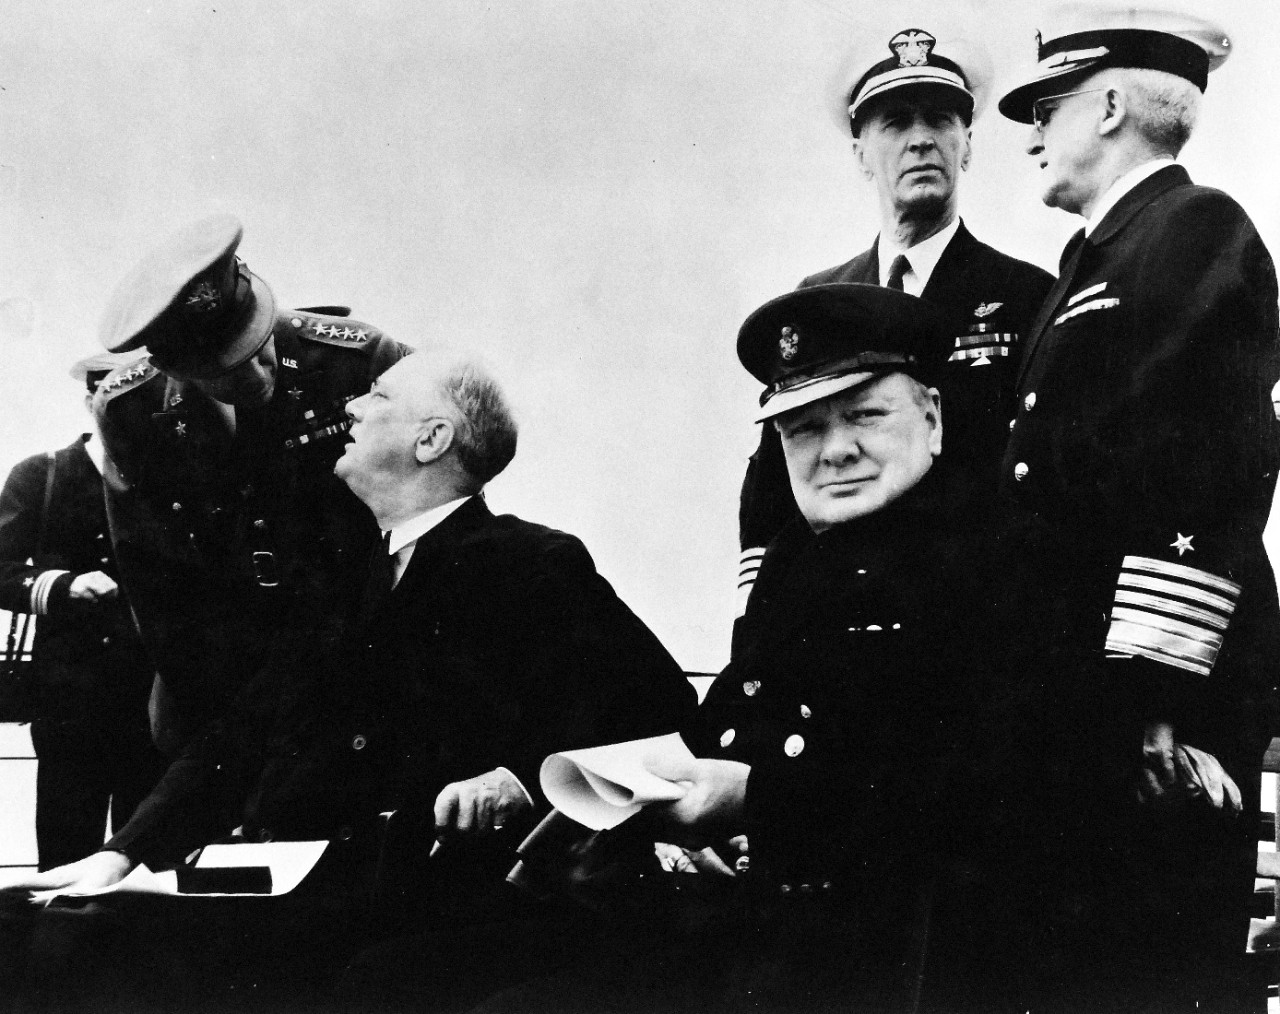 80-G-26881: Atlantic Charter, August 1941.  Informal group photograph including President Franklin D. Roosevelt and Prime Minister Winston S. Churchill on deck of HMS Prince of Wales during church services during the Atlantic Charter.  President Roosevelt chats with General George C. Marshall and Prime Minister Winston Churchill as they sit together.  Behind Churchill are:  Admiral Ernest J. King, (left) and Admiral Harold R. Stark, (right).  Photograph released August 1941.   Official U.S. Navy Photograph, now in the collections of the National Archives.  (2016/03/22).